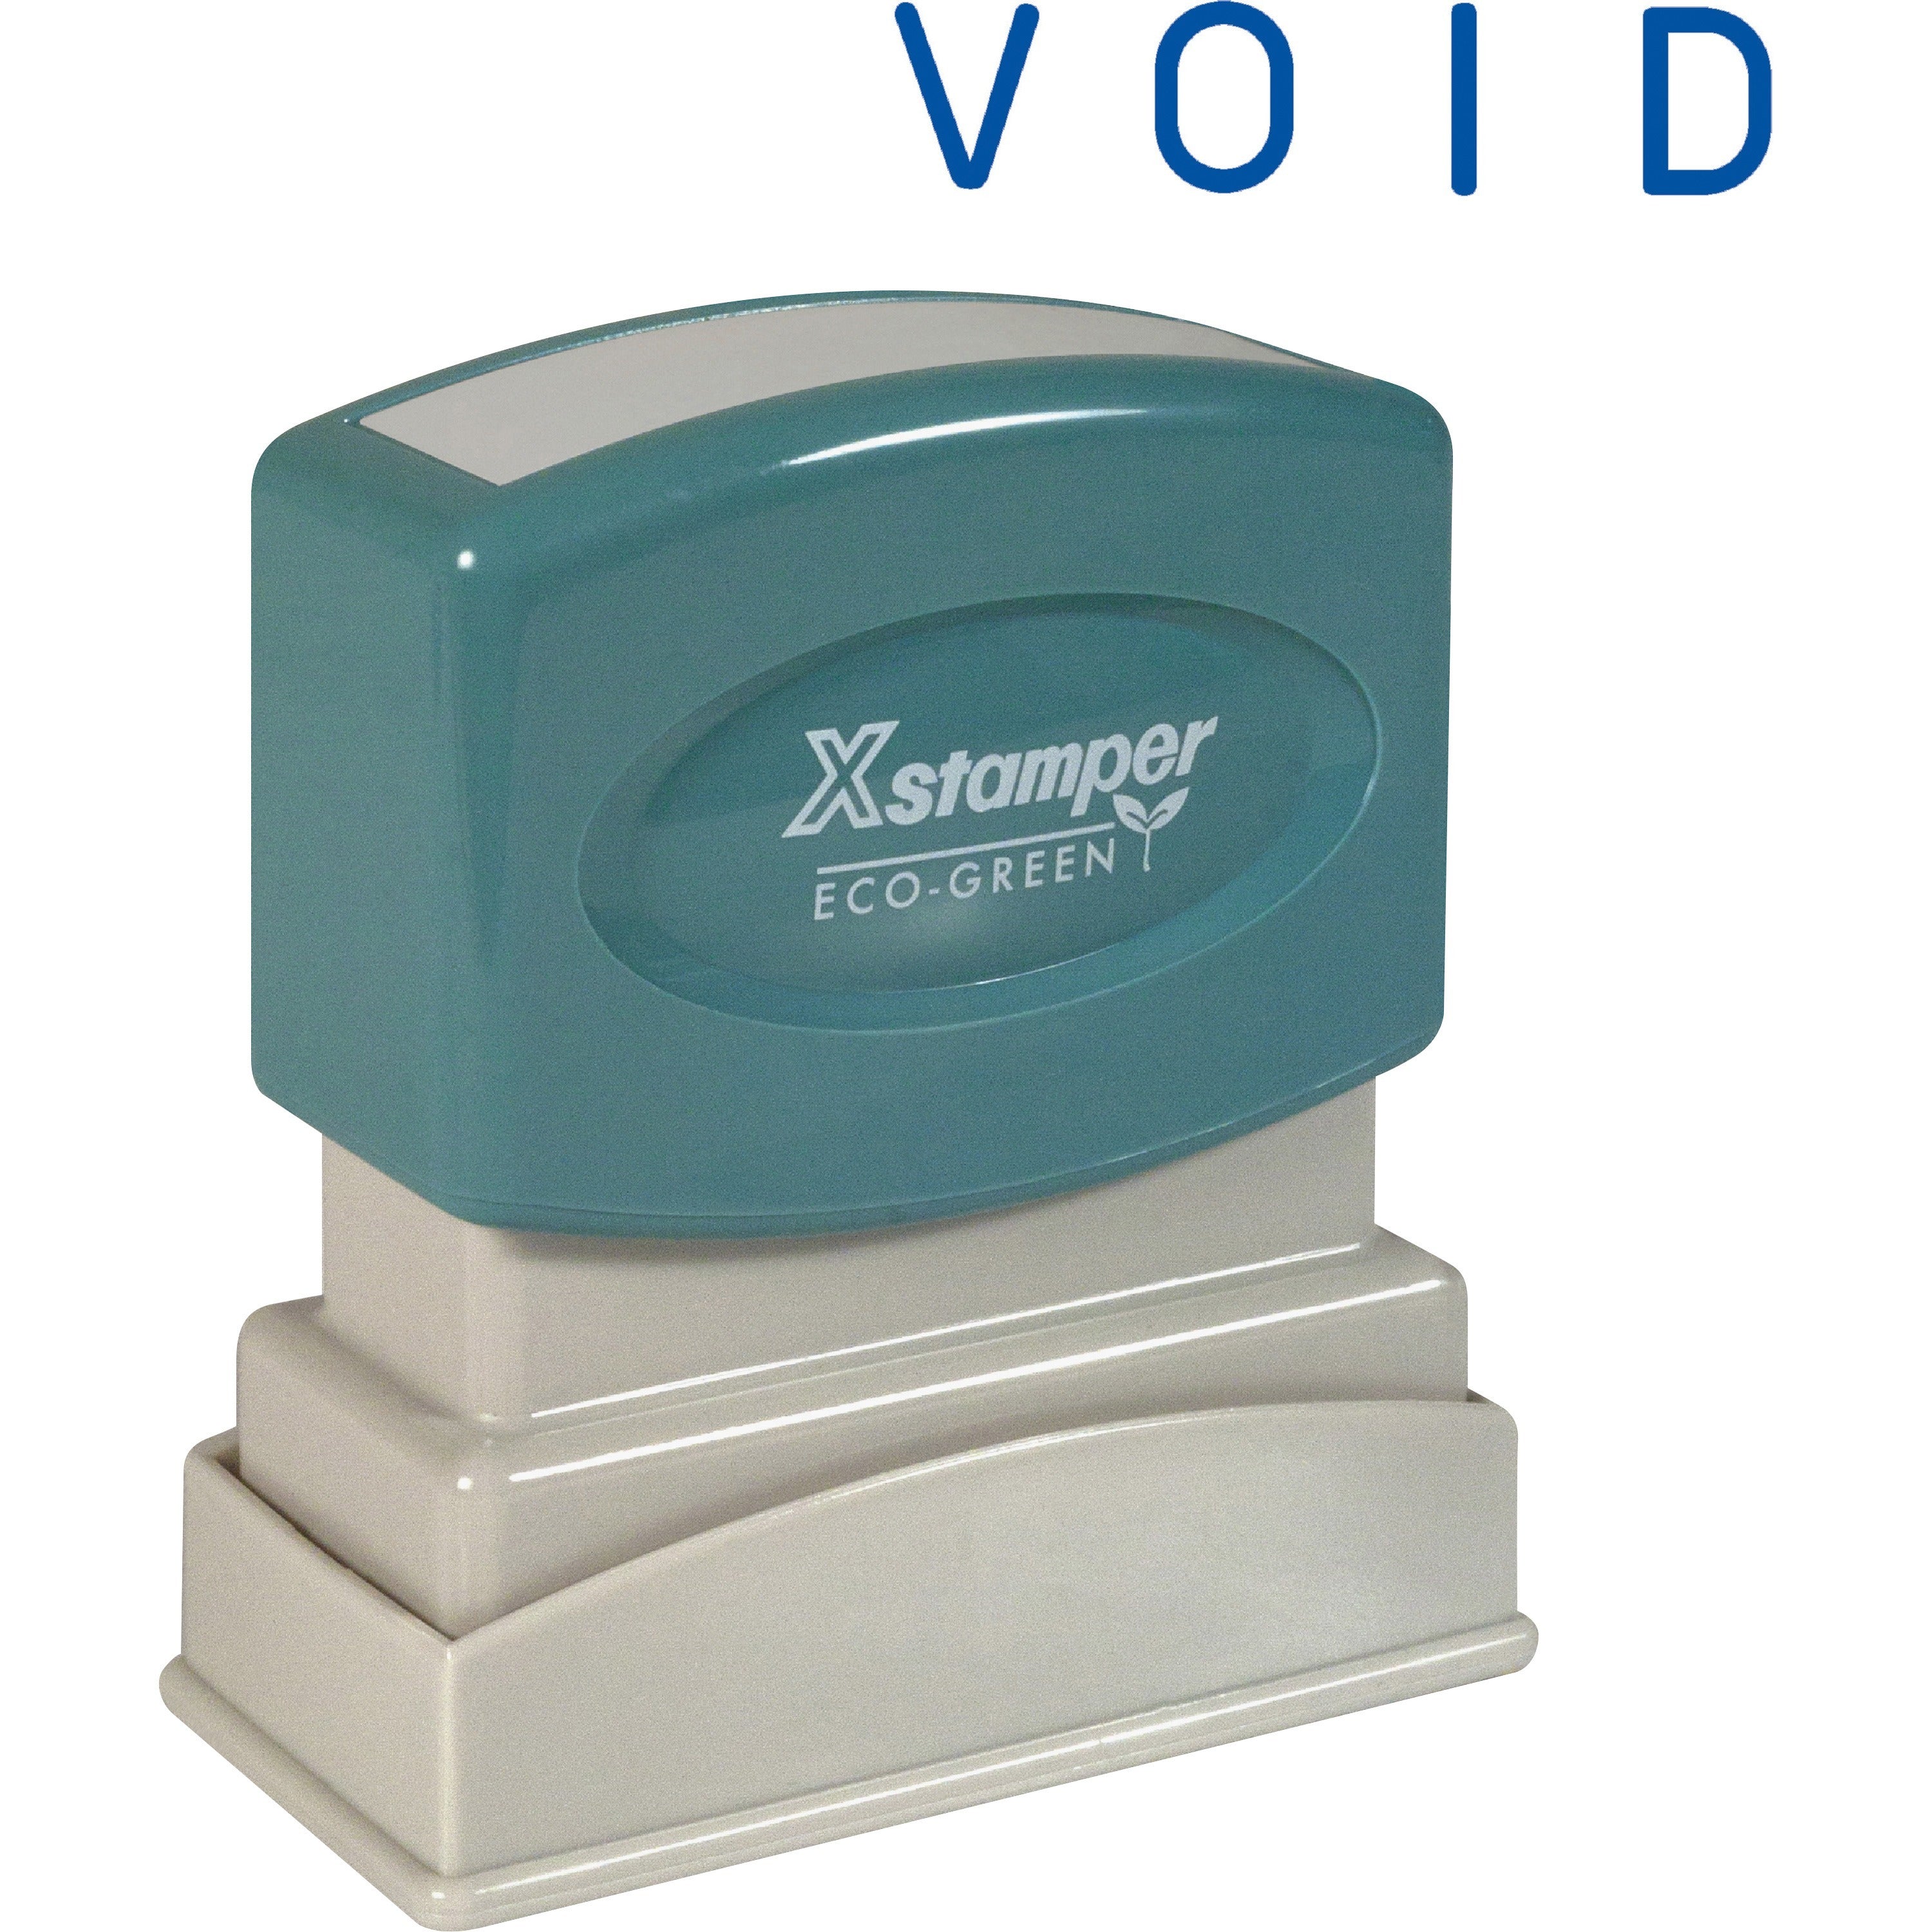 Xstamper VOID Title Stamp - Message Stamp - "VOID" - 0.50" Impression Width x 1.63" Impression Length - 100000 Impression(s) - Blue - Recycled - 1 Each - 